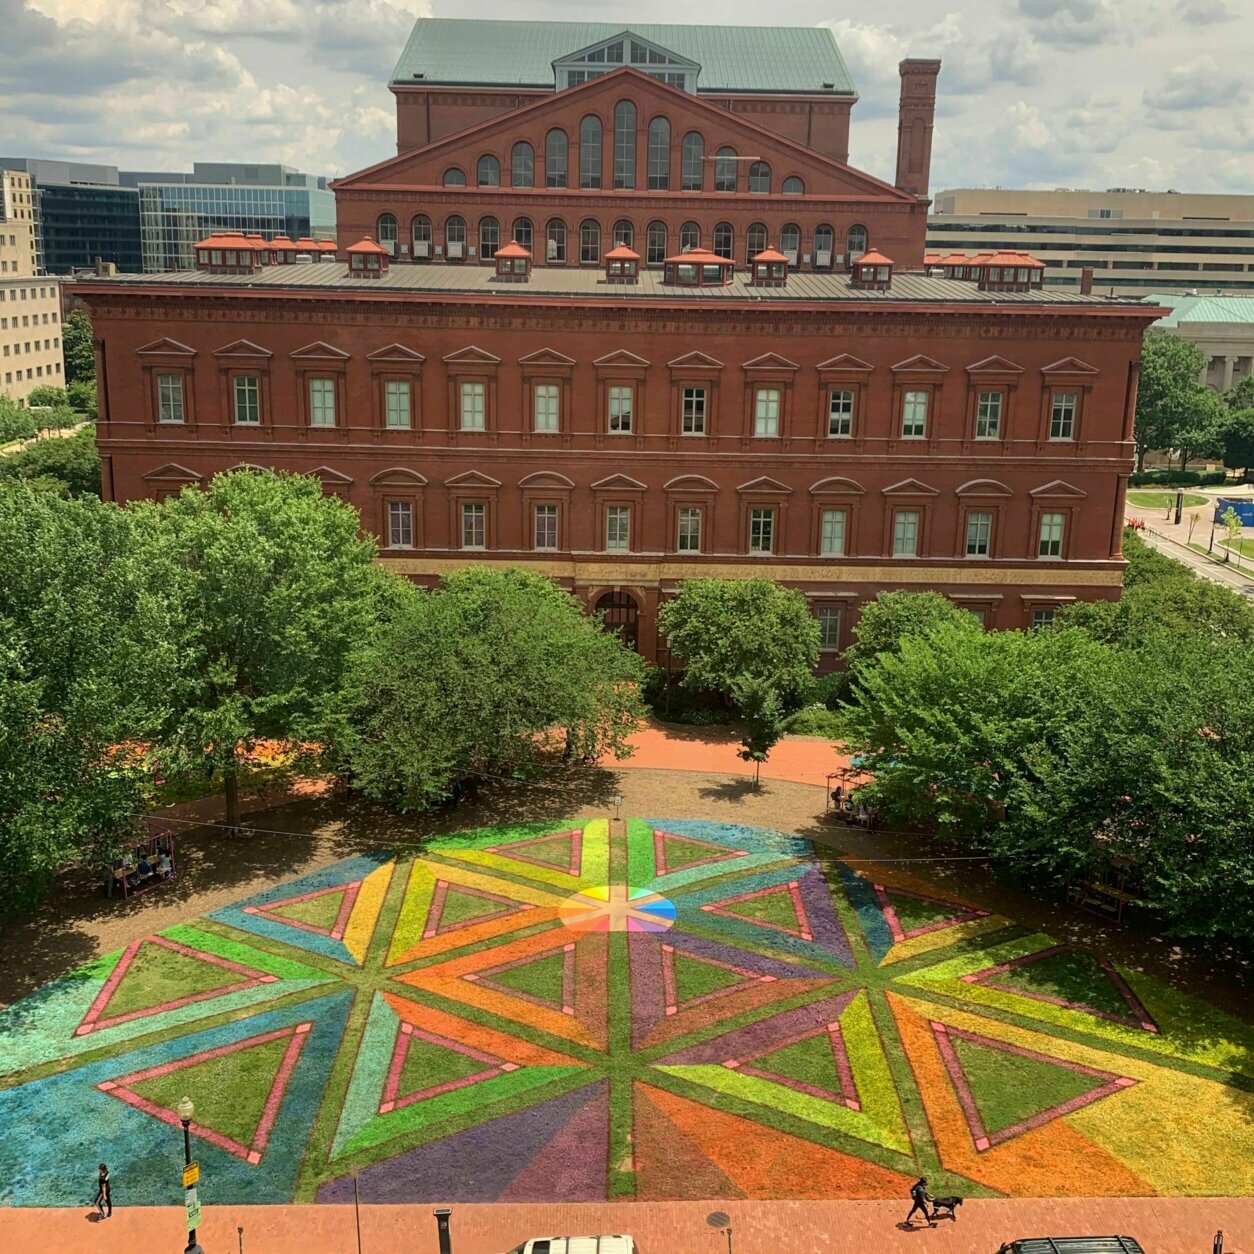 Artist Lisa Marie Thalhammer  of DC was commissioned by the Downtown DC Business Improvement District earlier this year, to use her artistic talents to create a design using lawn paint that promotes social distancing for the organization’s DowntownDC Summer Flicks series. It's called "Equilateral Network."